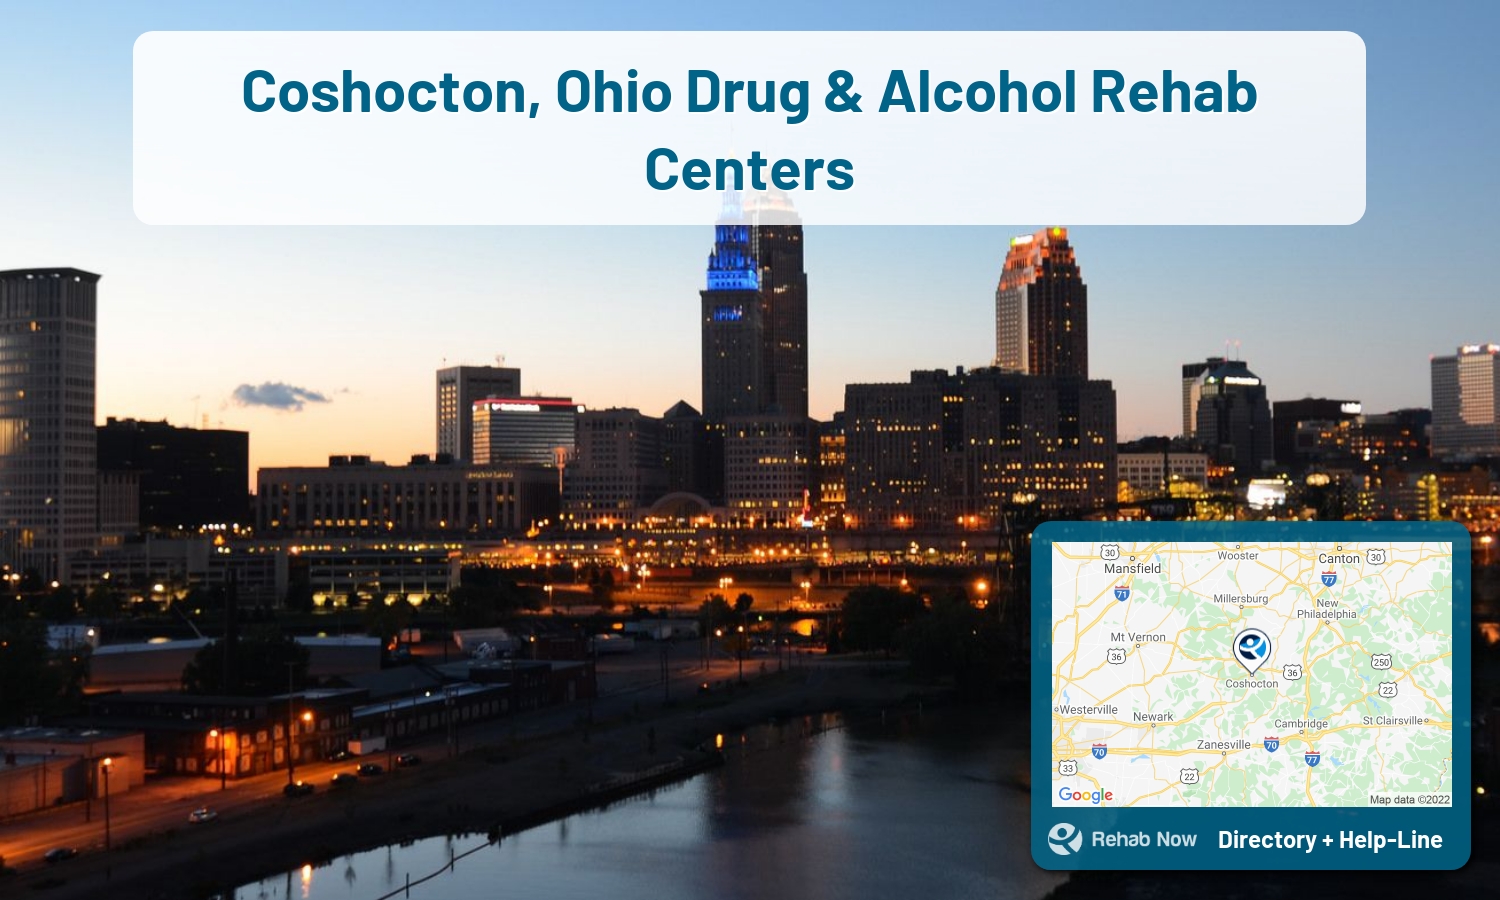 Need treatment nearby in Coshocton, Ohio? Choose a drug/alcohol rehab center from our list, or call our hotline now for free help.